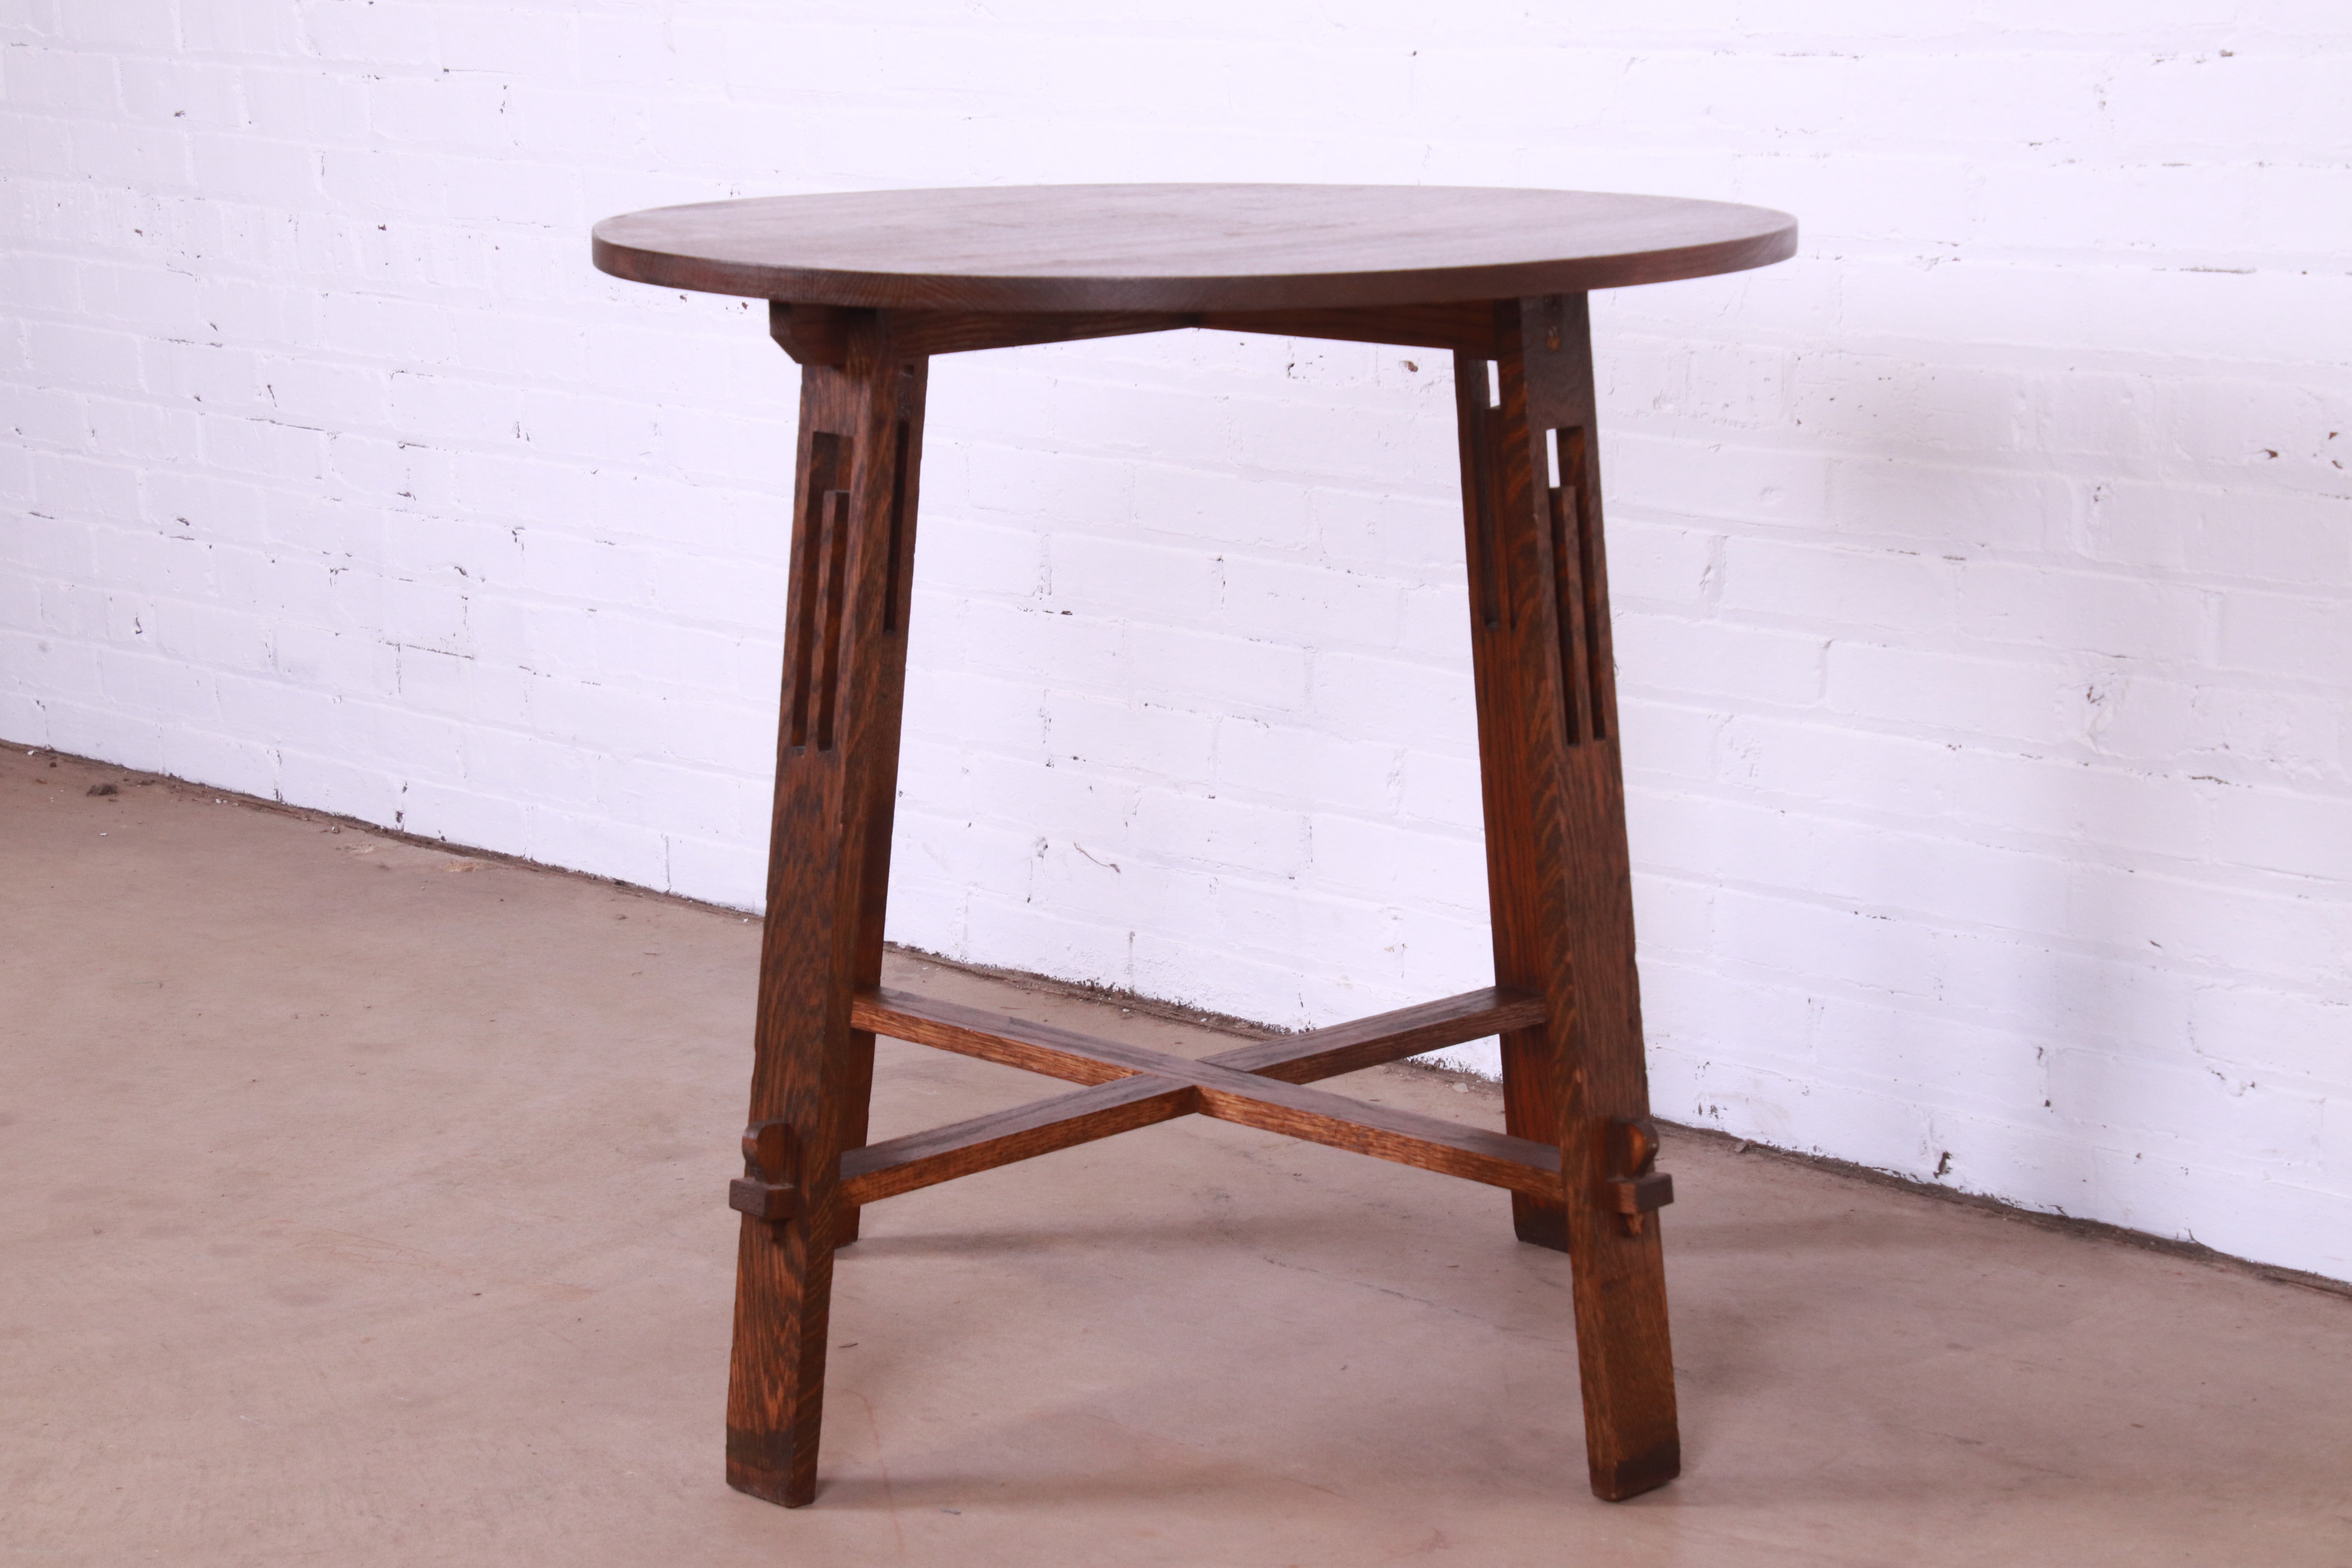 A beautiful antique Mission oak Arts & Crafts round occasional side table or tea table

Recently procured from Frank Lloyd Wright's DeRhodes House

In the manner of Stickley

USA, Circa 1900

Measures: 29.25